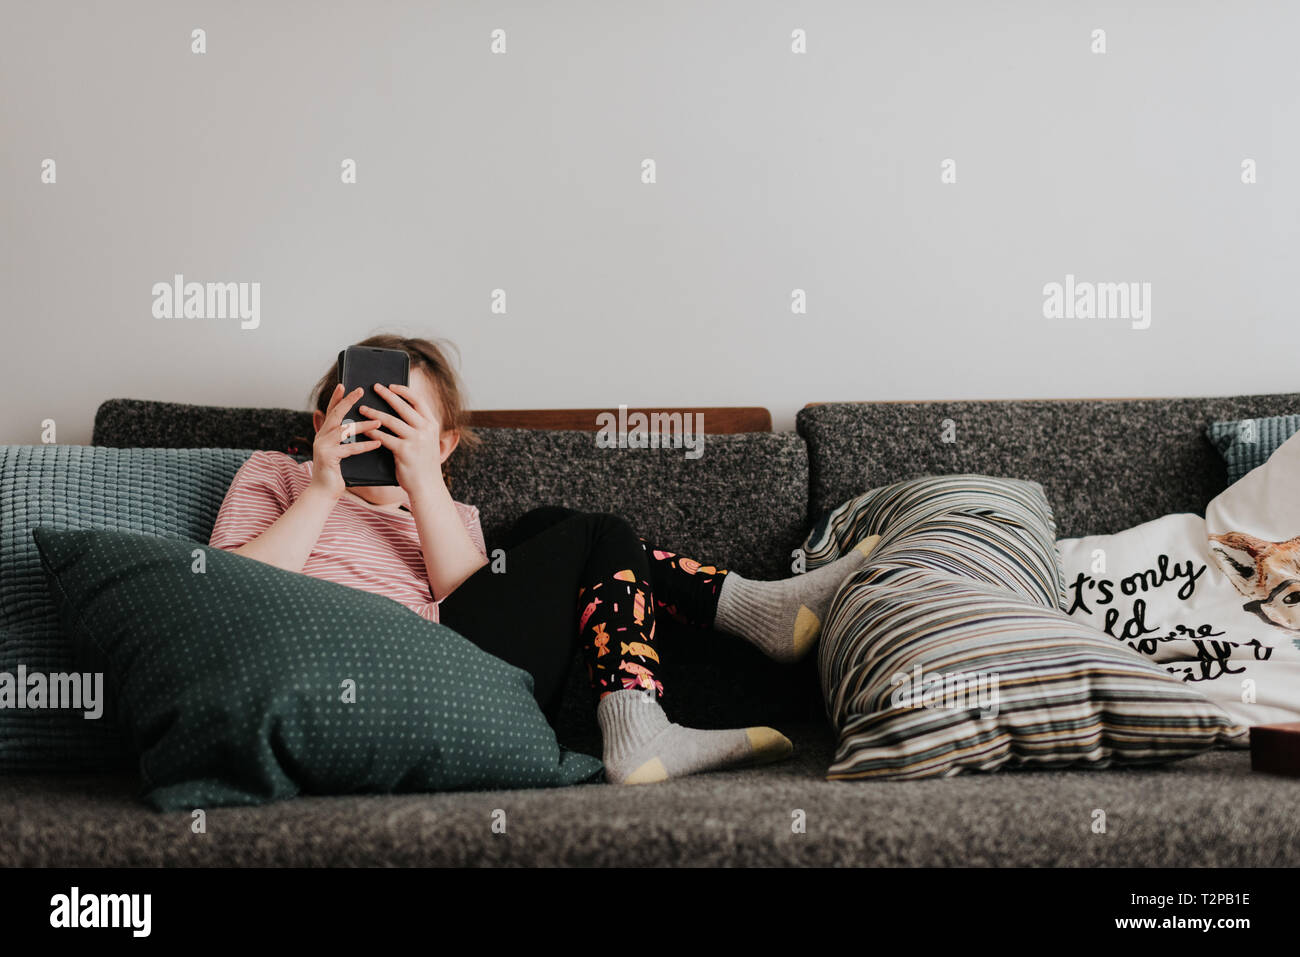 Girl playing with smartphone on couch Stock Photo